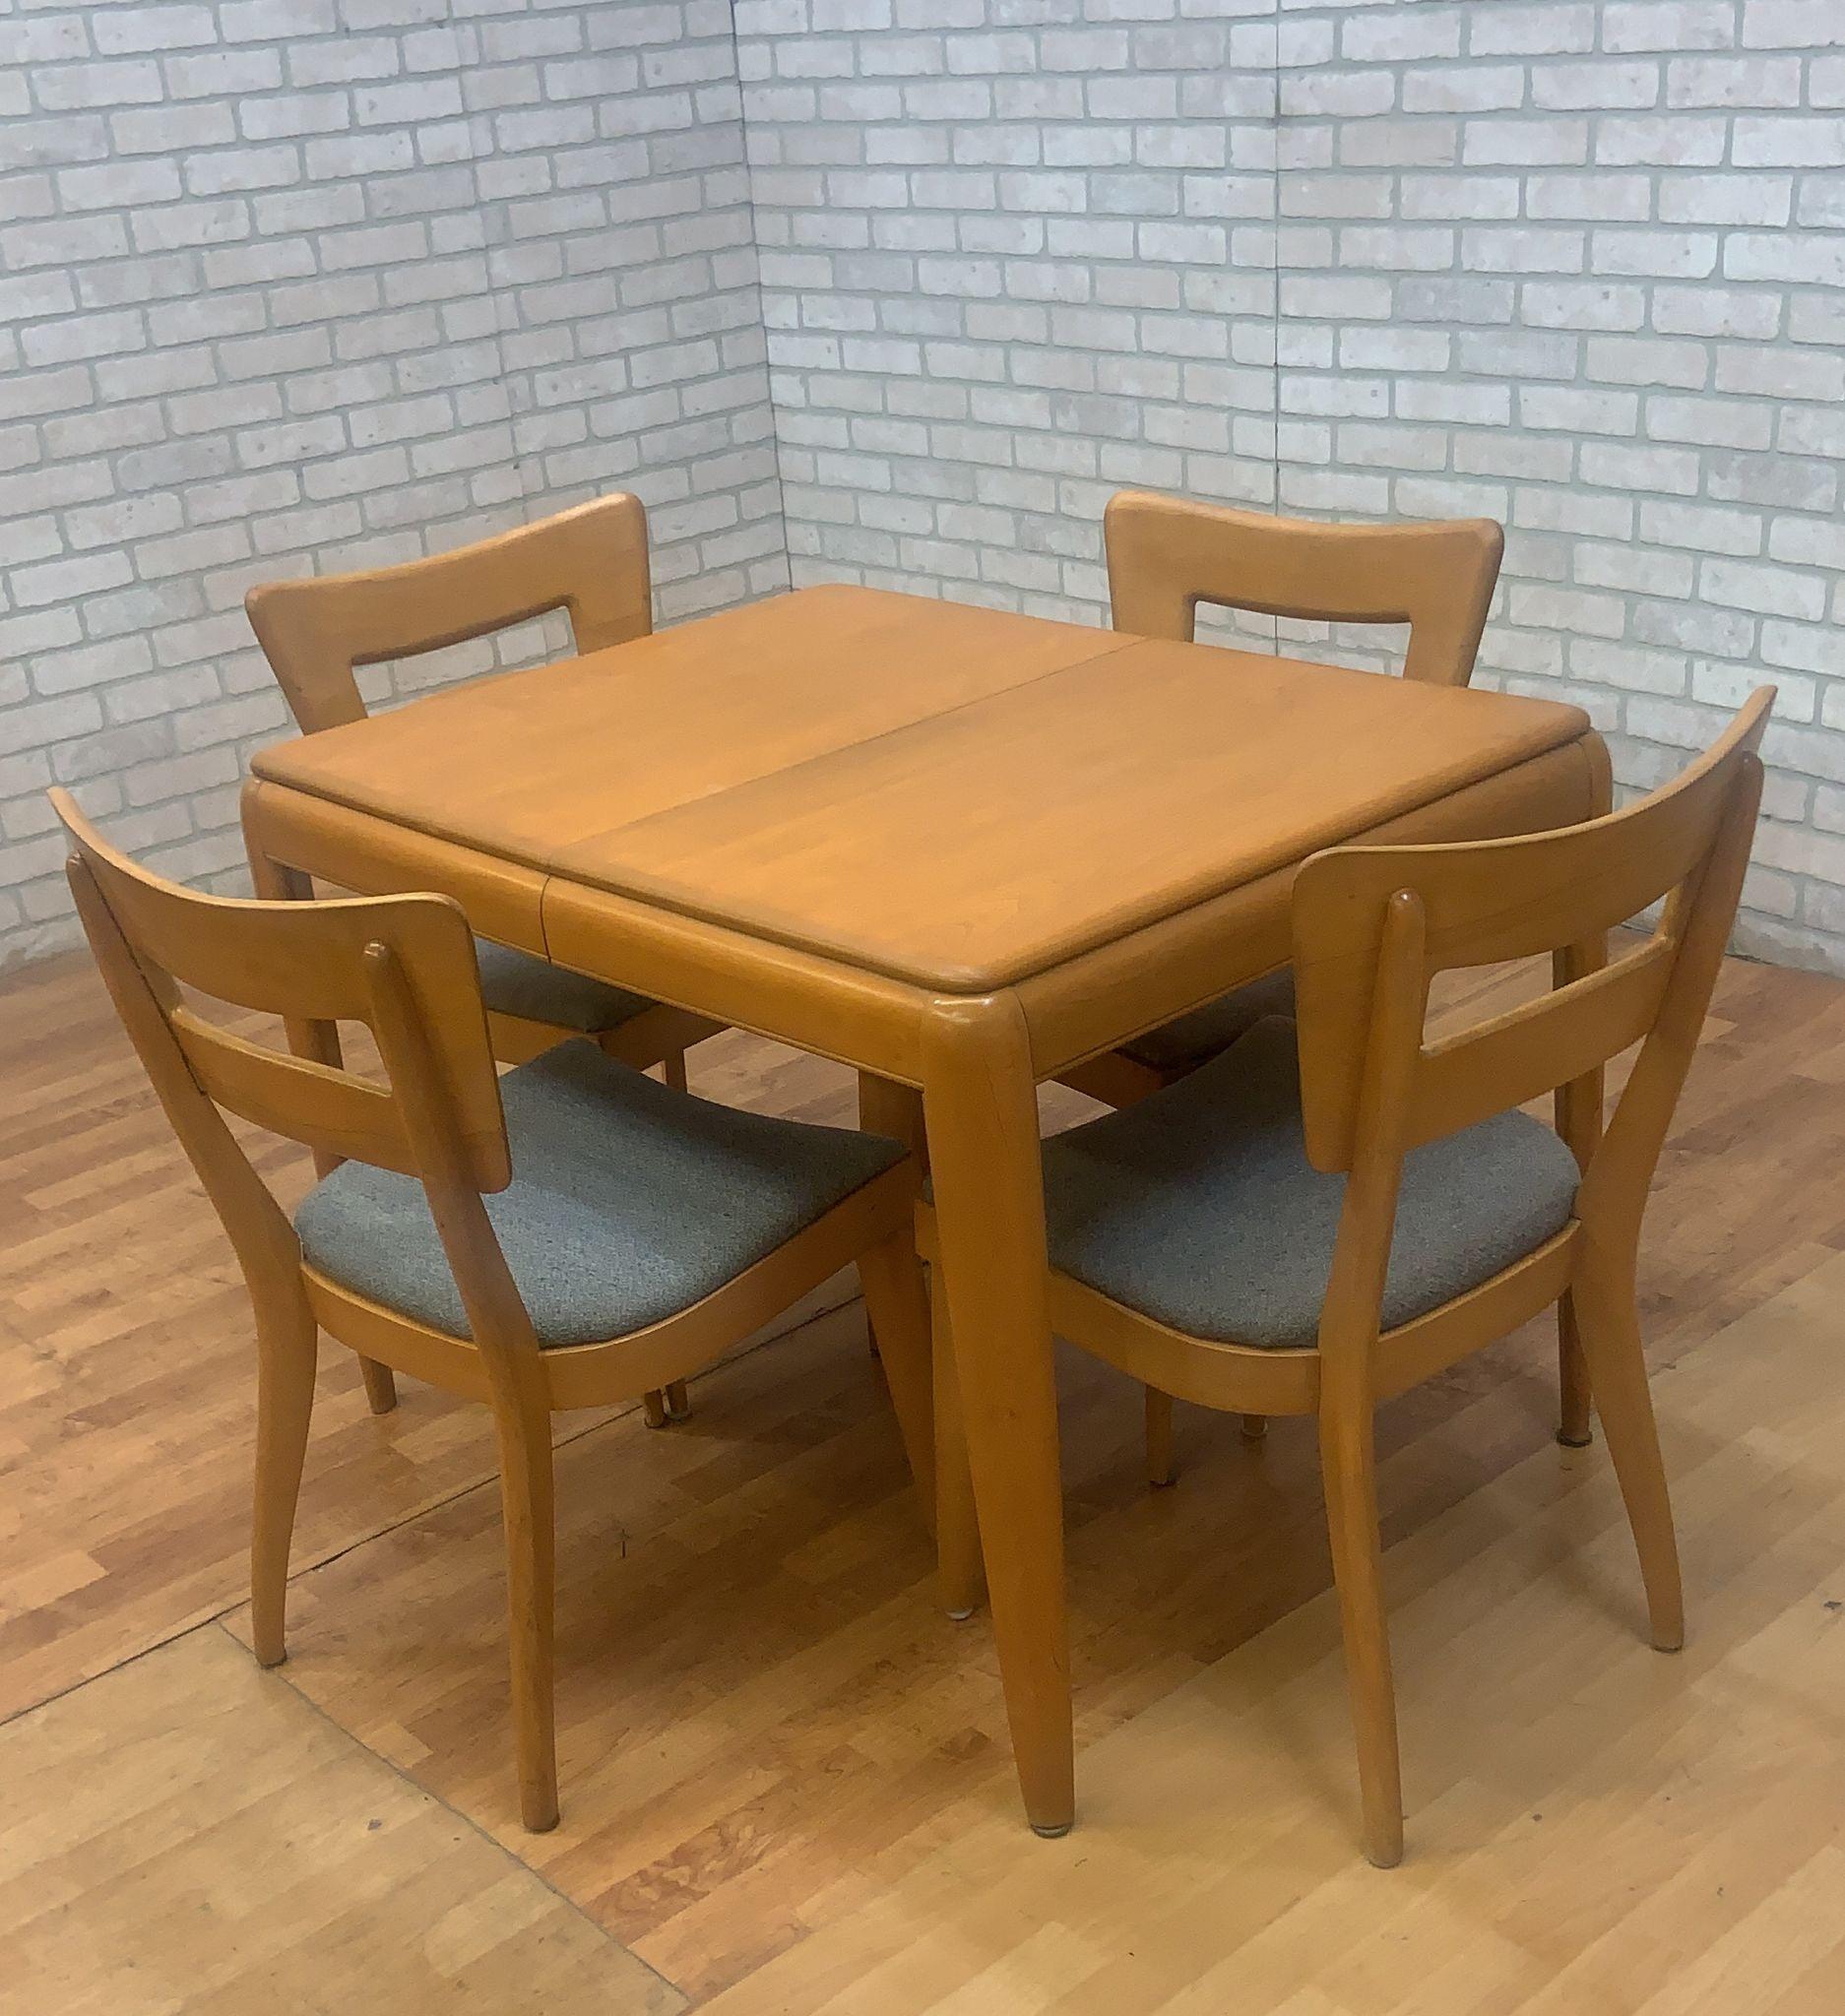 Mid Century Modern Heywood Wakefield 8 Piece Dining Set

The Mid Century Modern Heywood Wakefield 8 Piece Dining Set is a timeless representation of mid-century design excellence. This set, crafted by Heywood Wakefield, includes six M154 “Dog Bone”